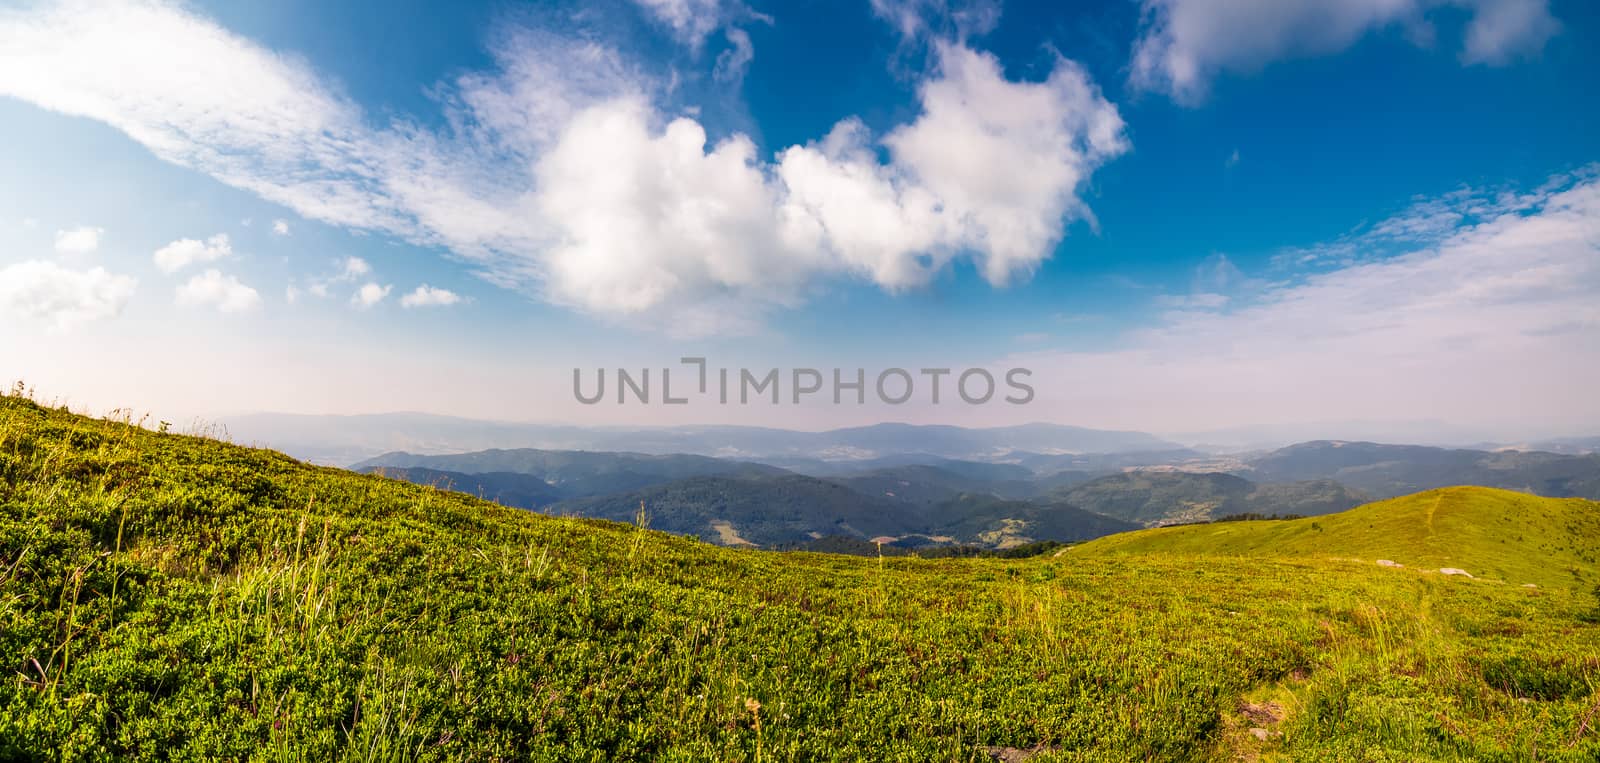 beautiful panorama of mountainous landscape. blue sky with some clouds over the grassy slope of a mountain ridge. lovely summer weather